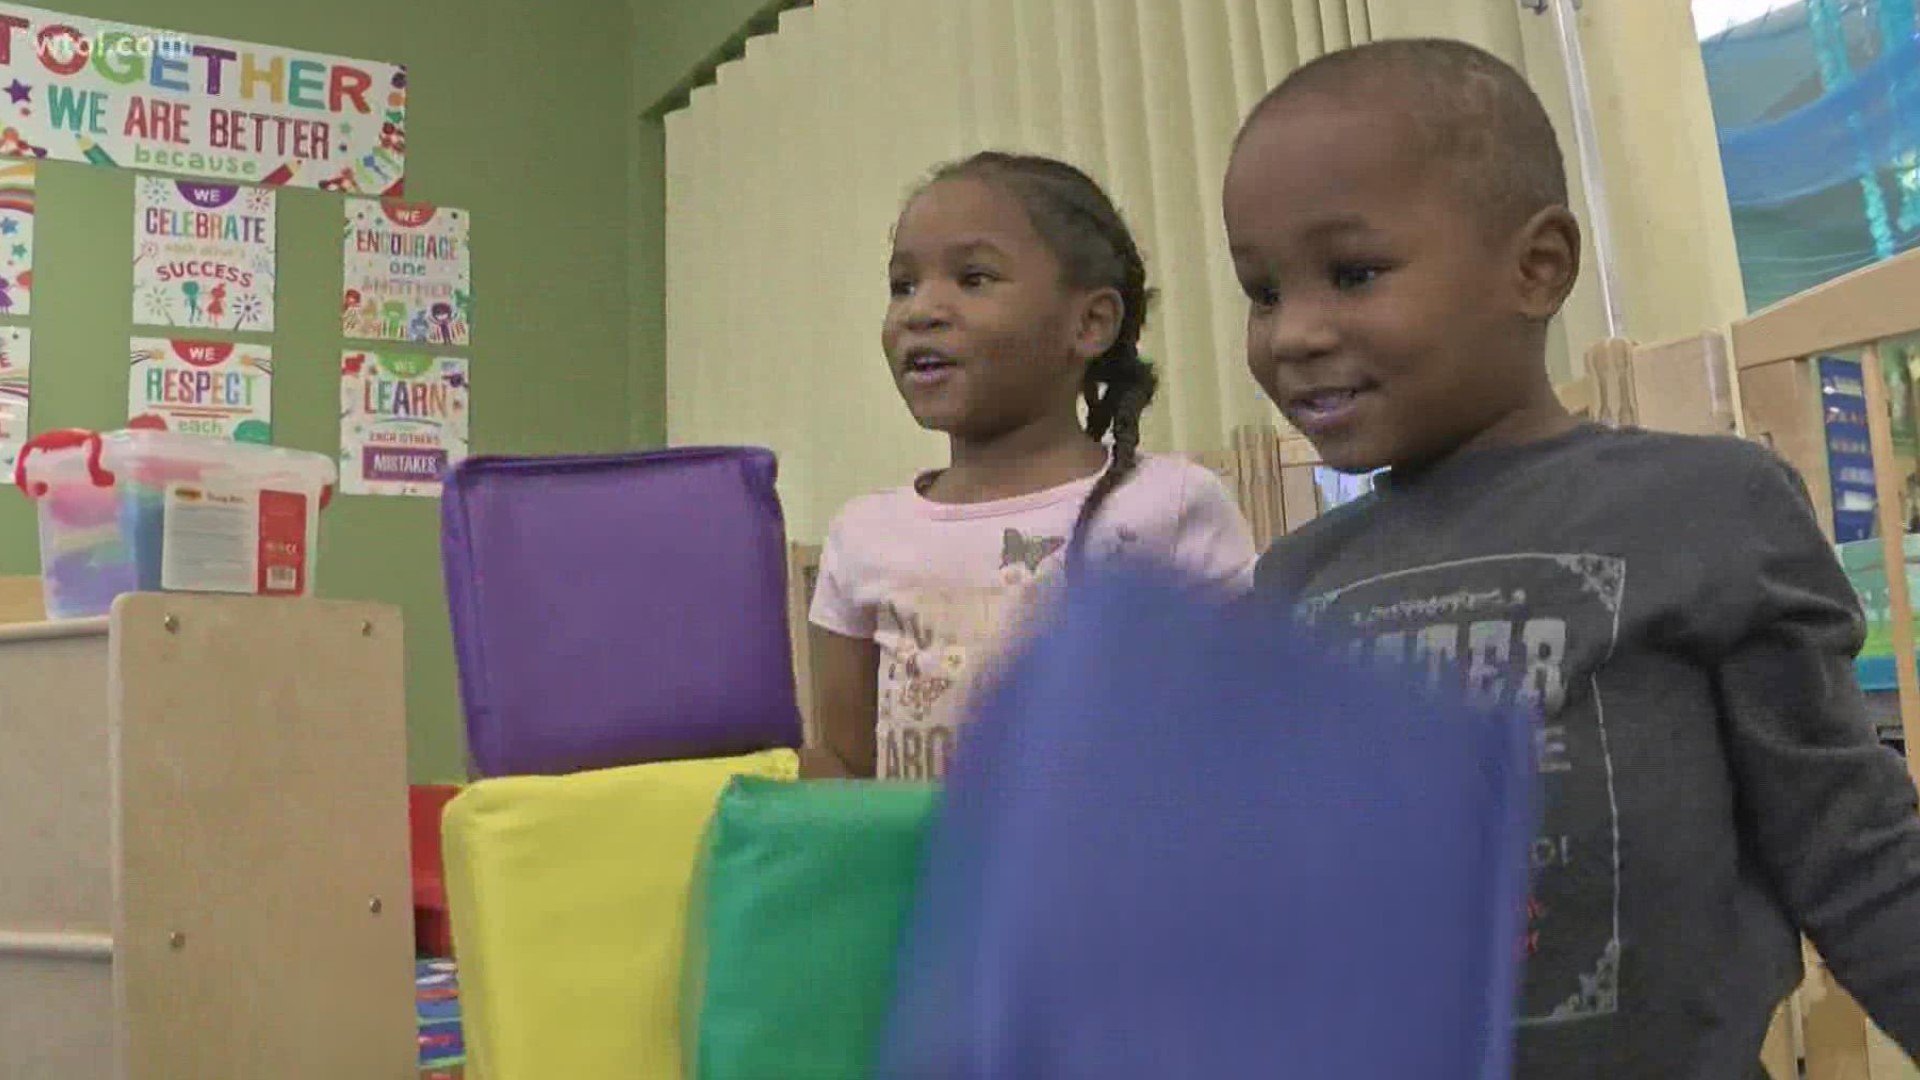 As offices and schools reopen, there's still uncertainty over what parents can expect this year. Experts say finding stable child care is a must.